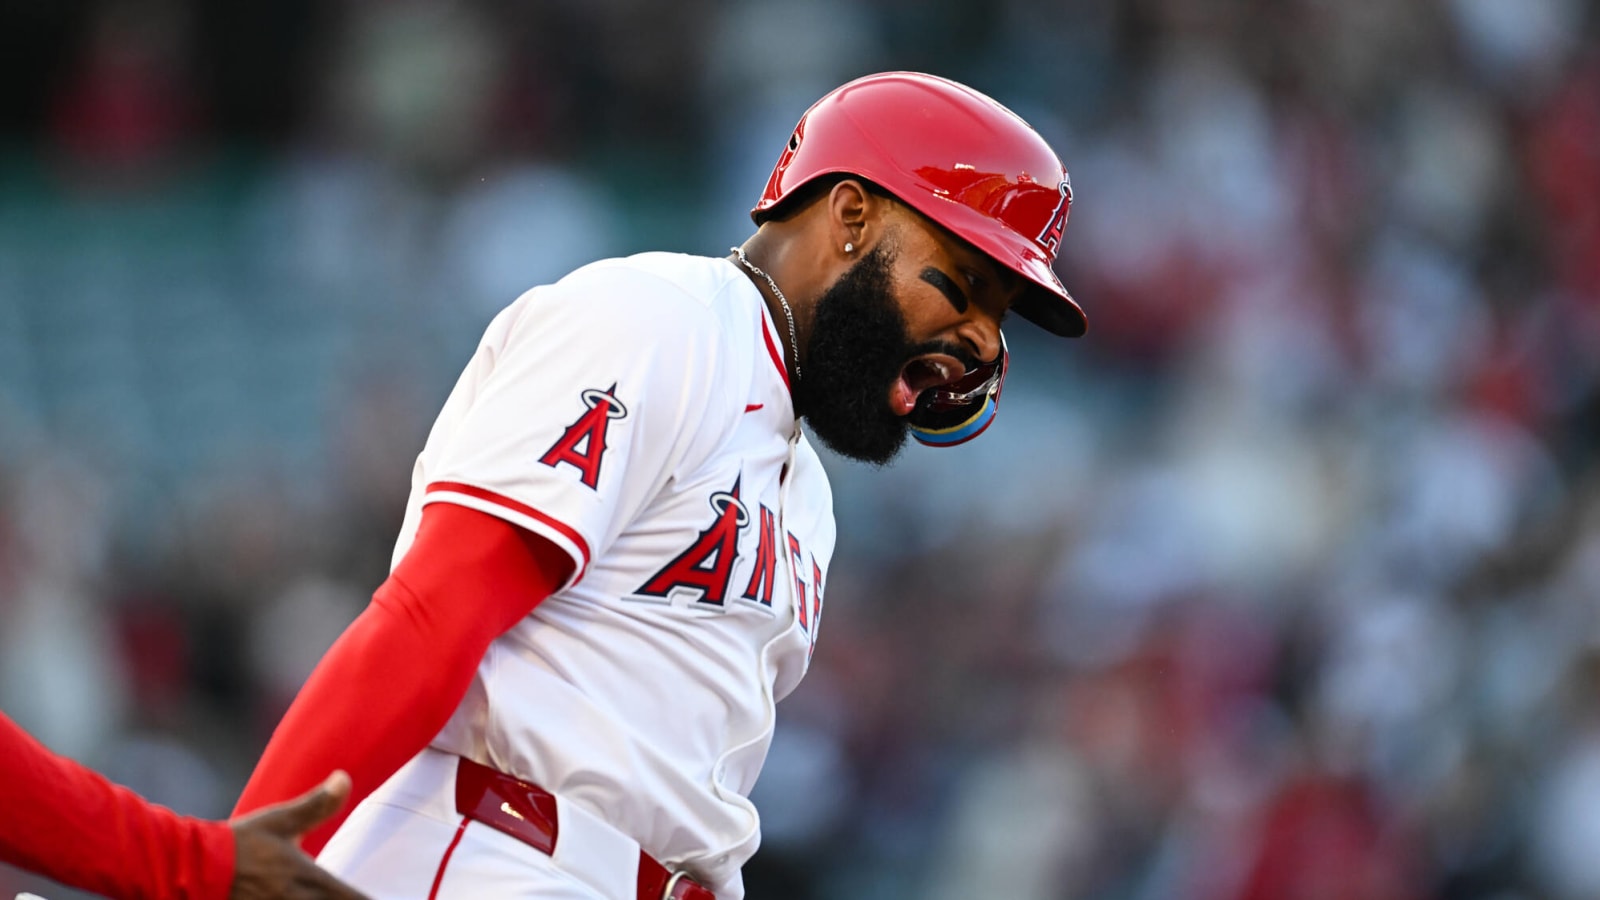  Jo Adell Righting The Ship After Early May Slump